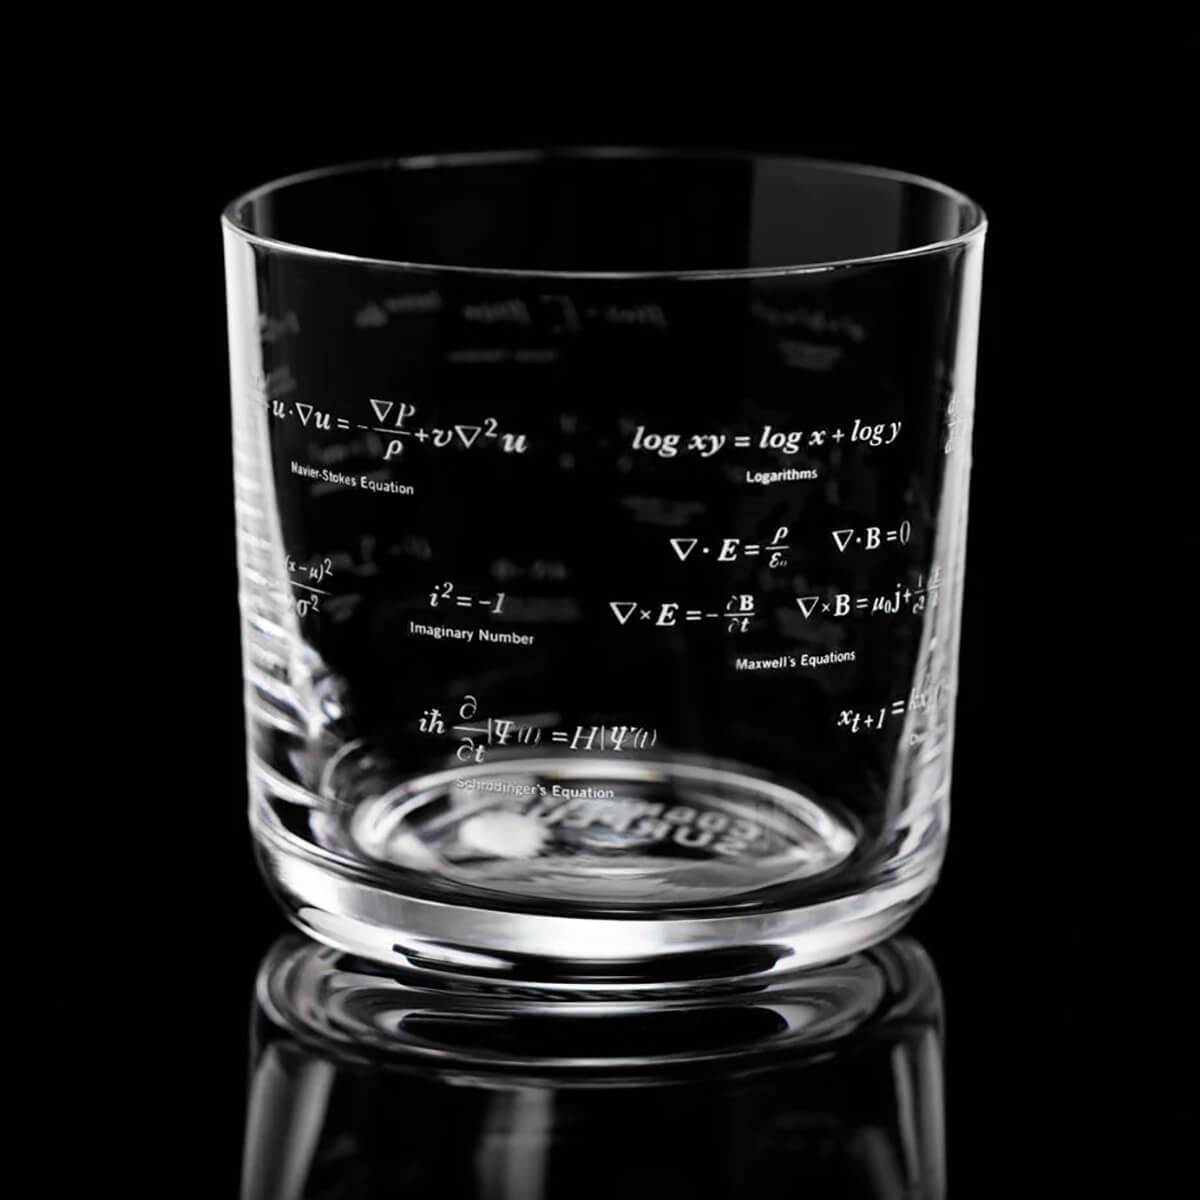 Equations that Changed the World Glass Tumbler additional image